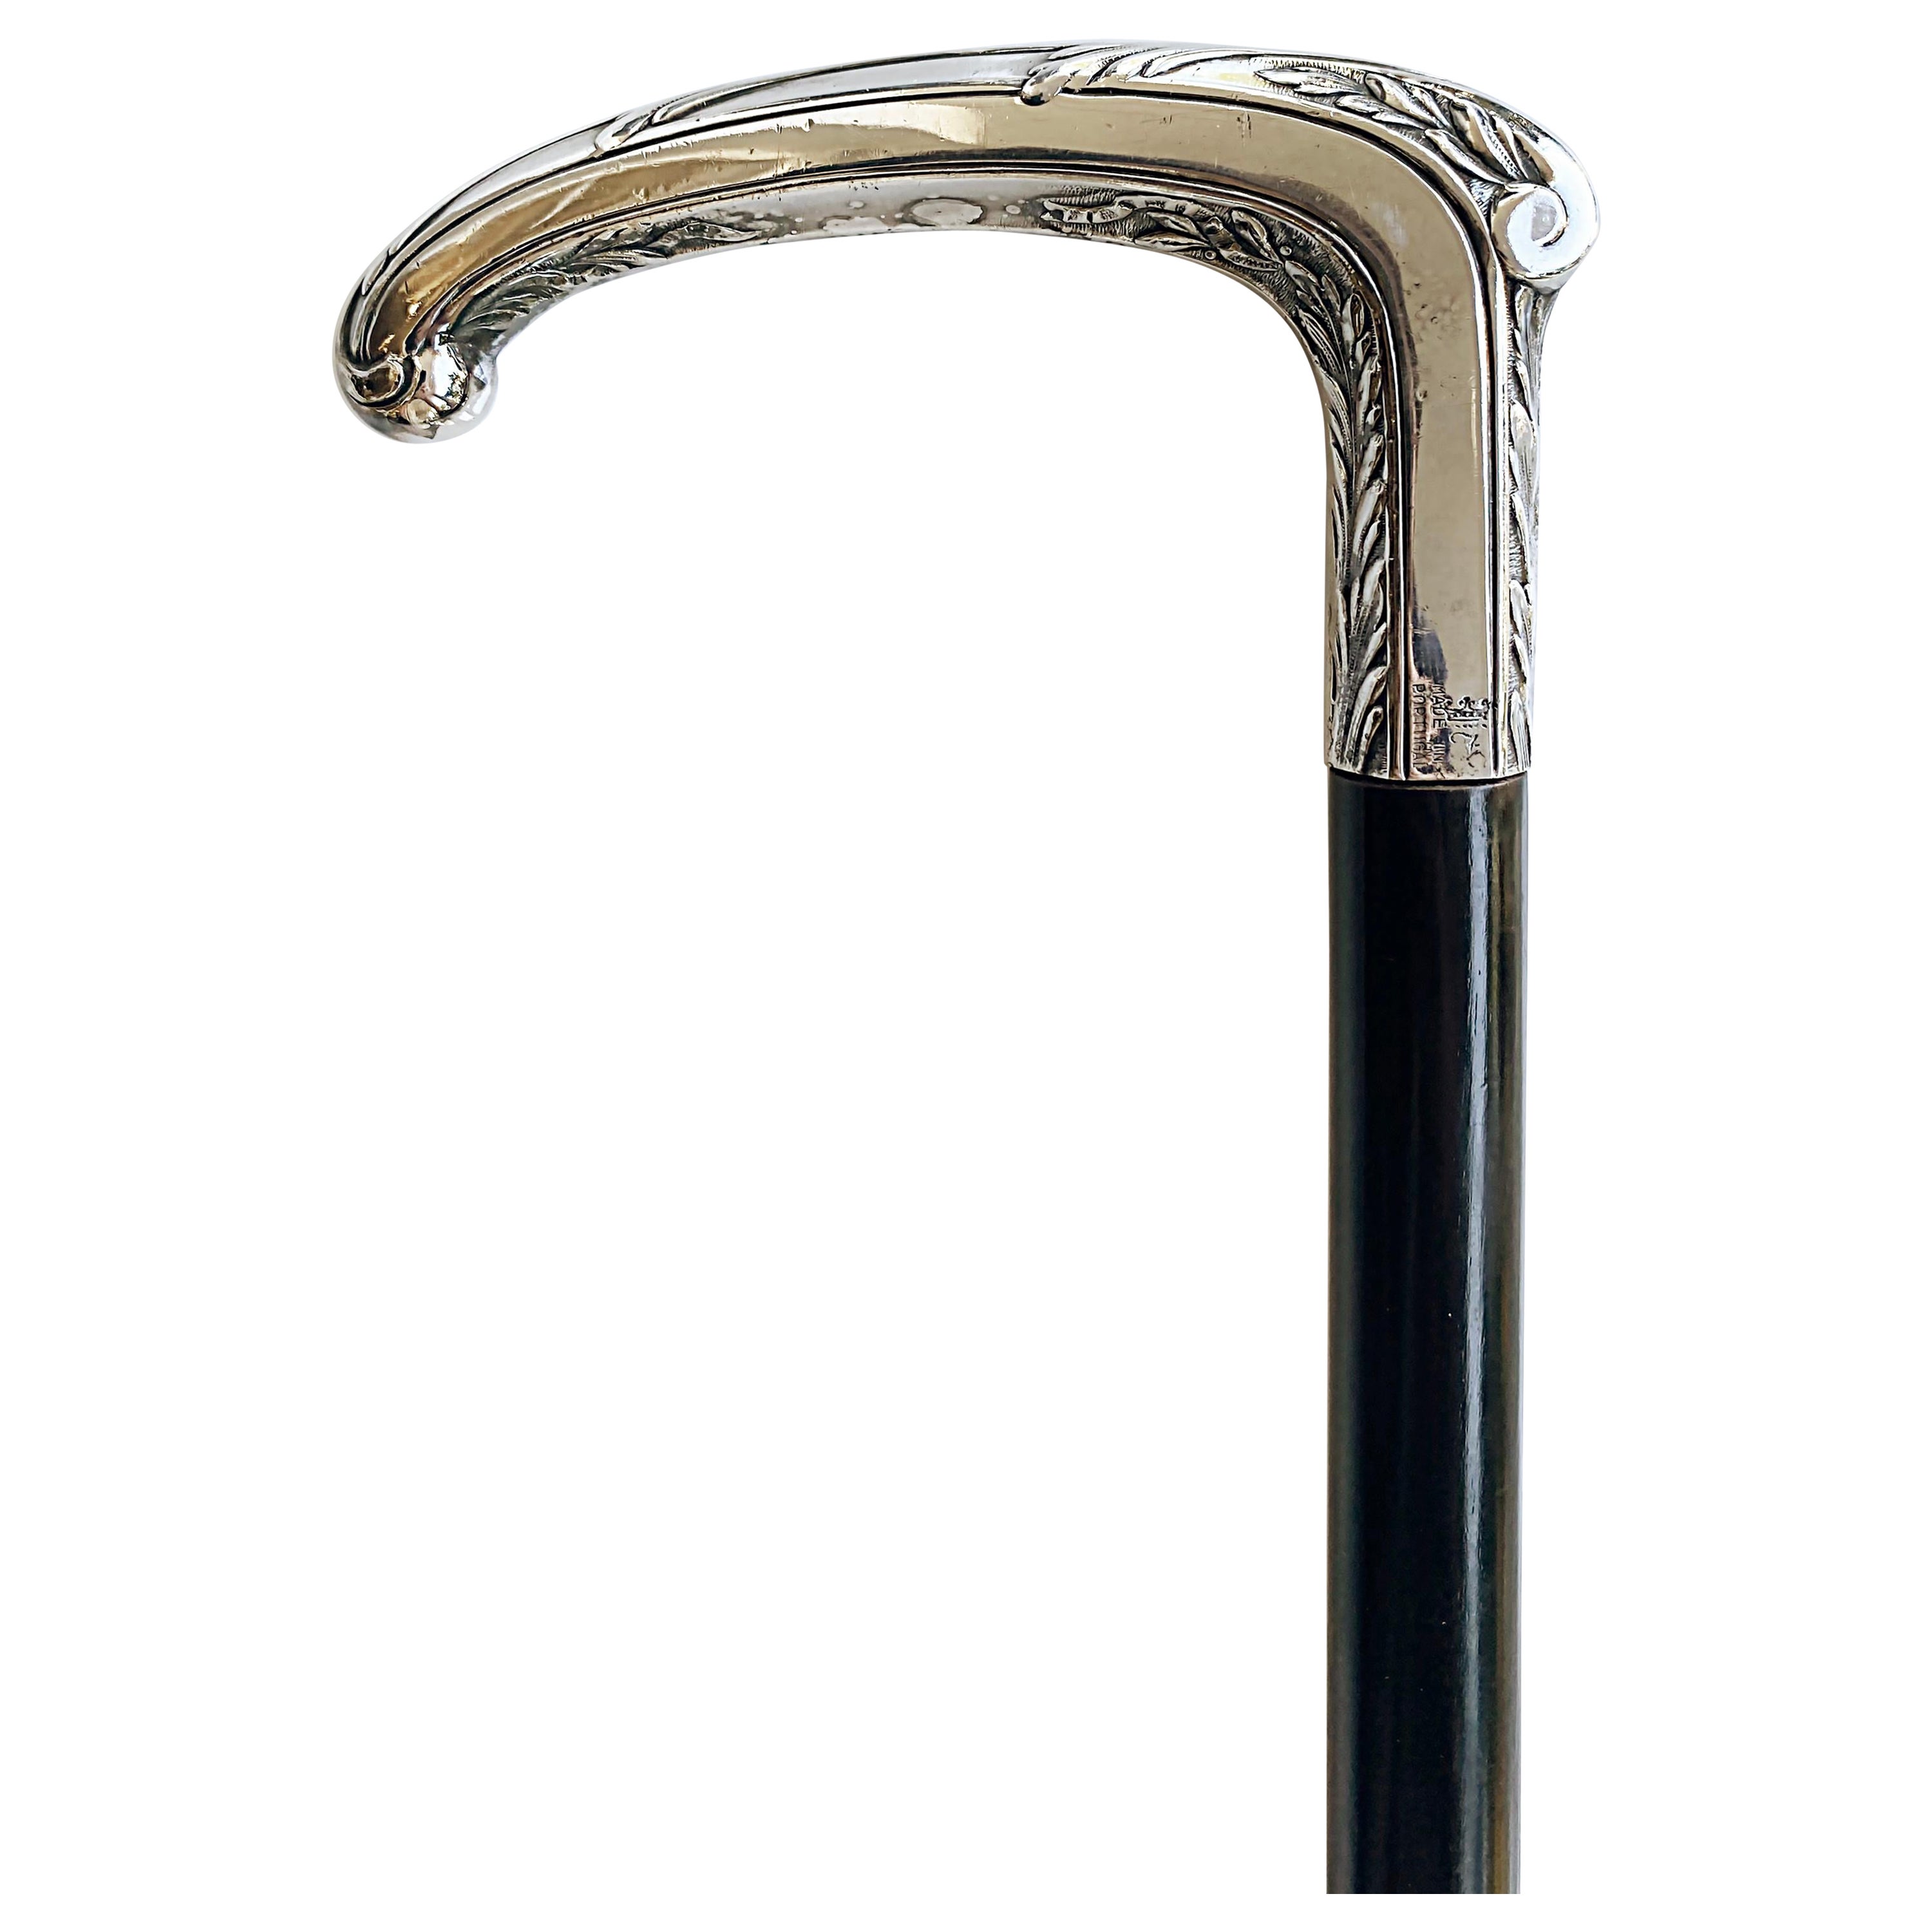 20th Century Silver Handle Walking Cane Made in Portugal with Hallmarks